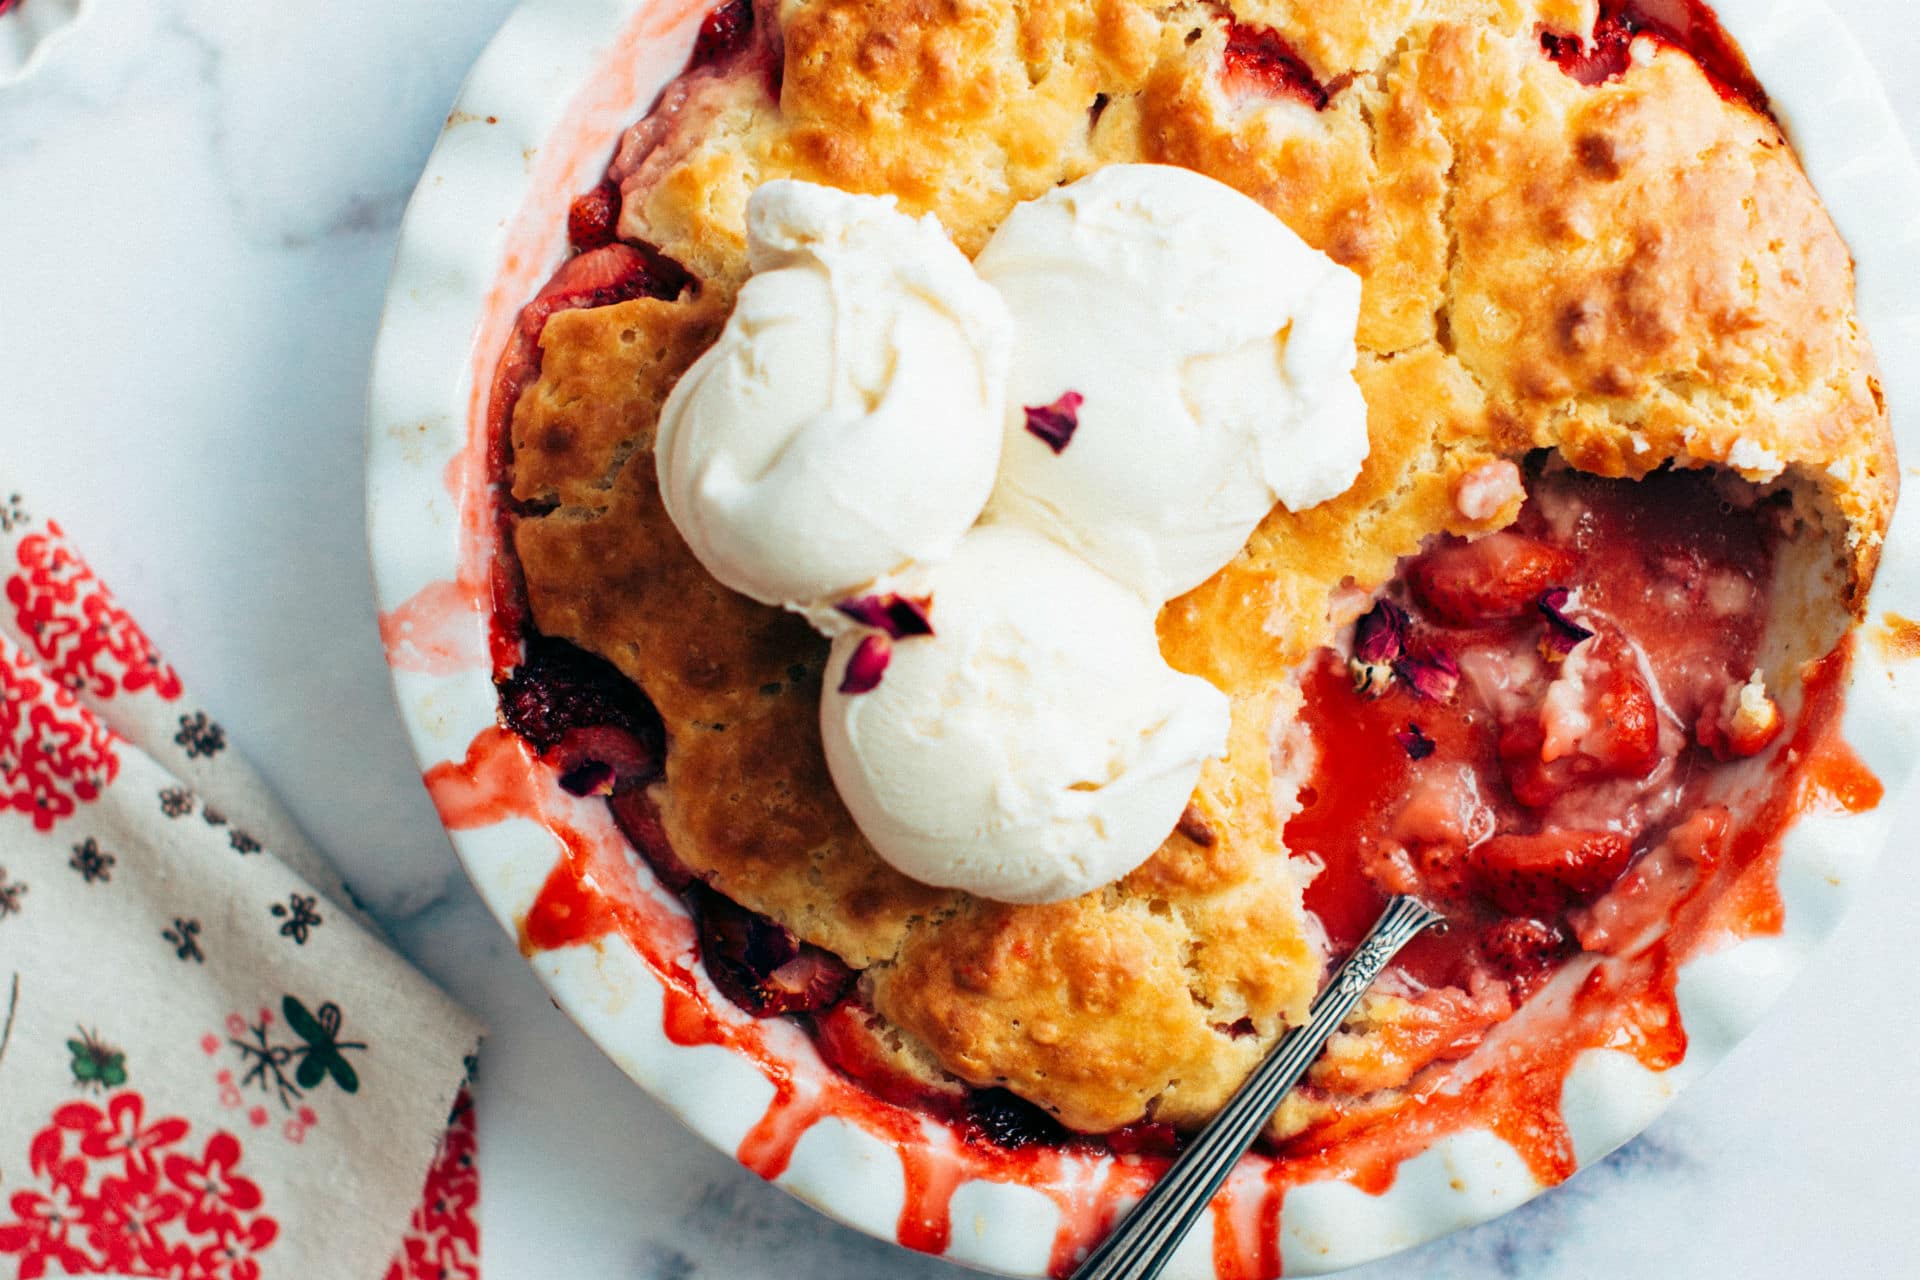 Strawberry pie with a scoop of ice cream